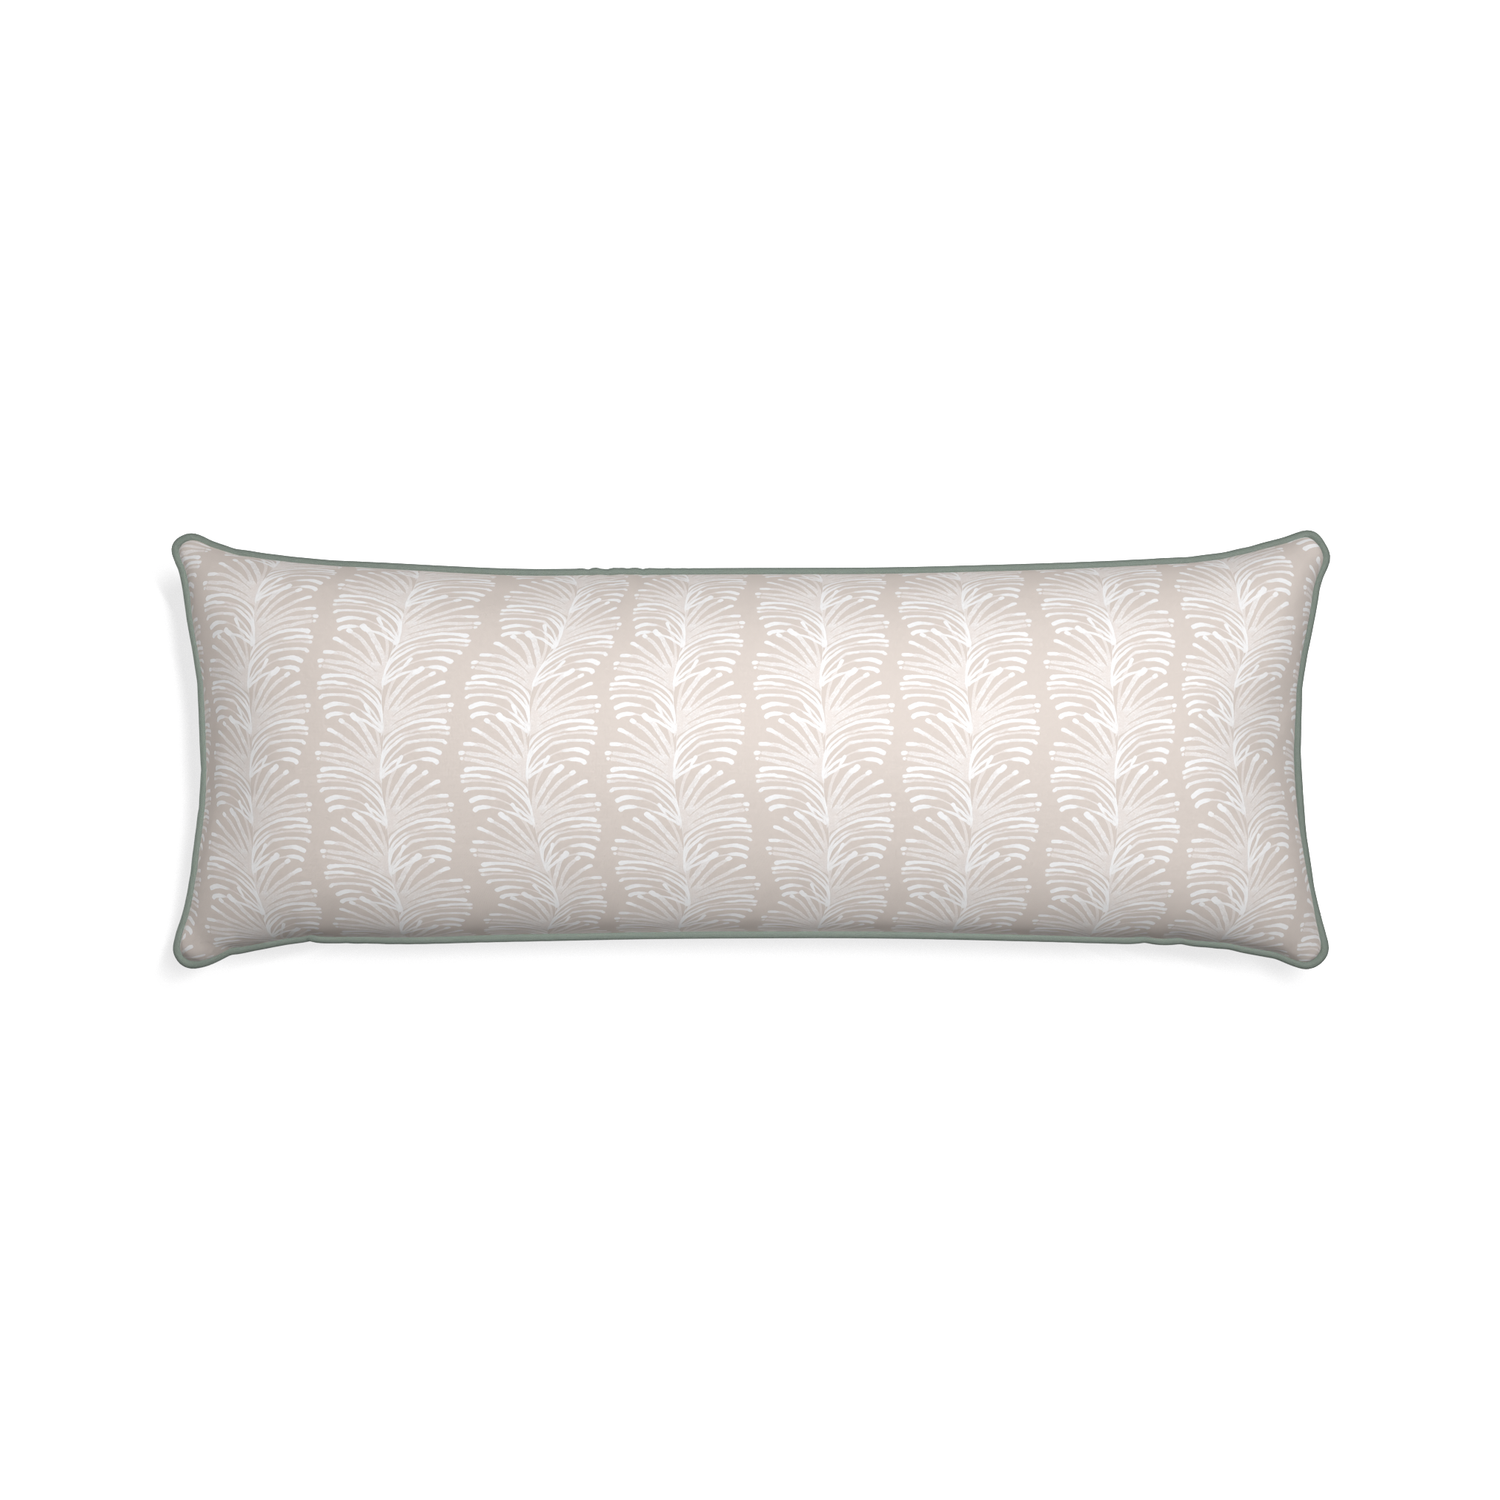 Xl-lumbar emma sand custom sand colored botanical stripepillow with sage piping on white background